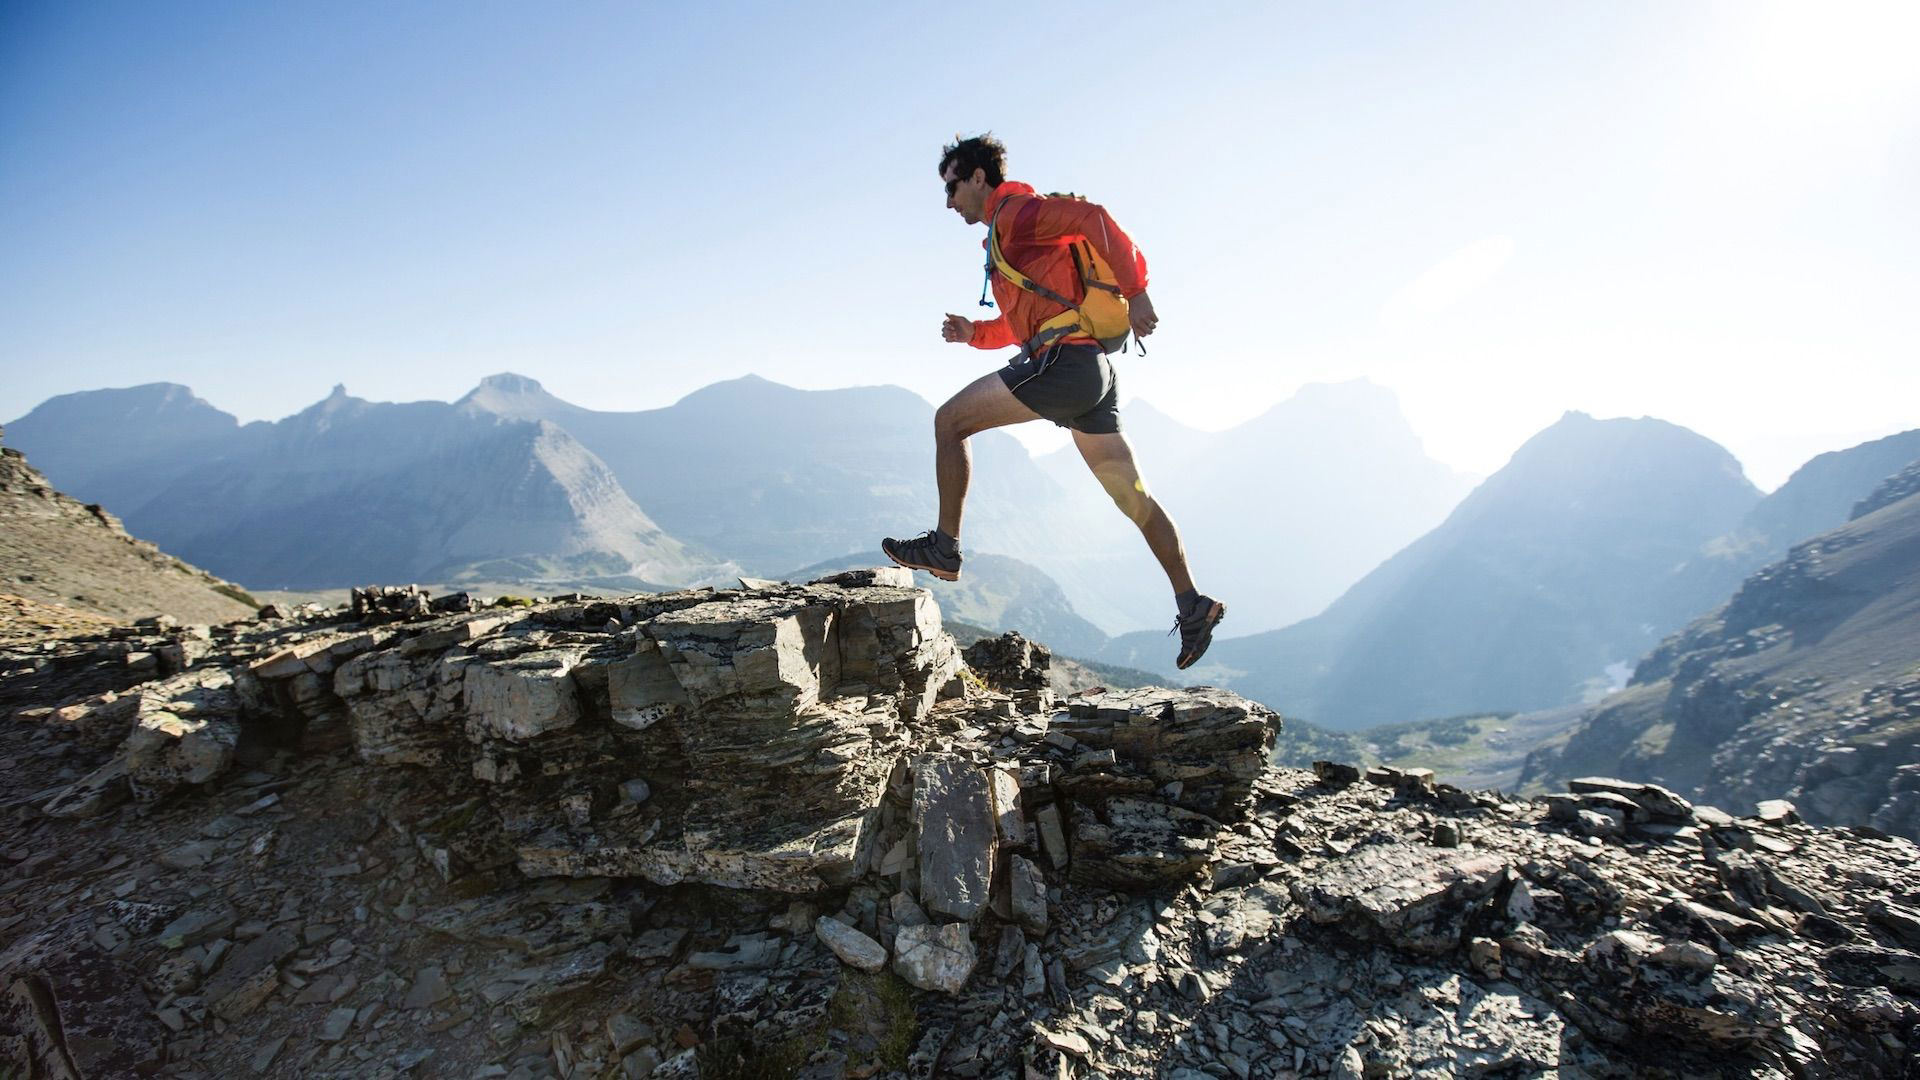 What are the essentials for solo trail running?